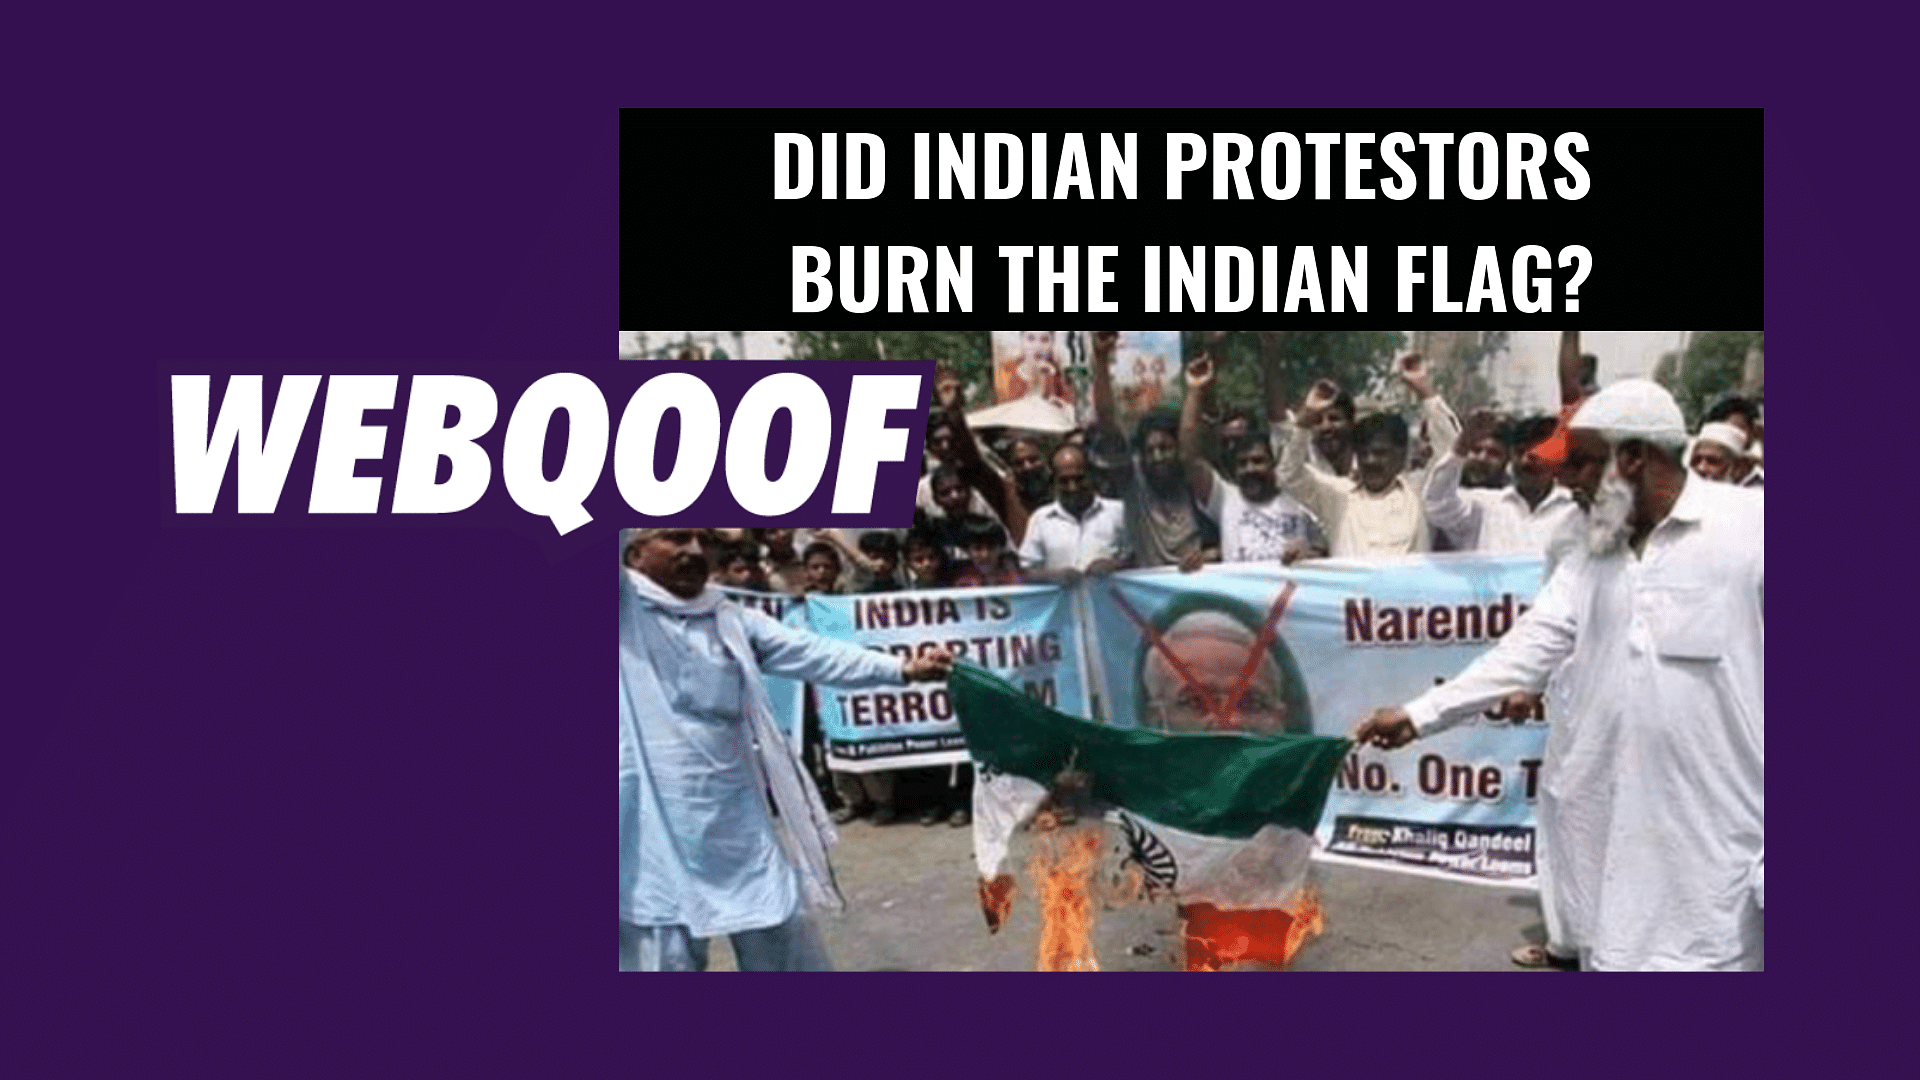 The flag was burnt by Pak protesters who were angry about PM Modi’s remarks made in 2015.